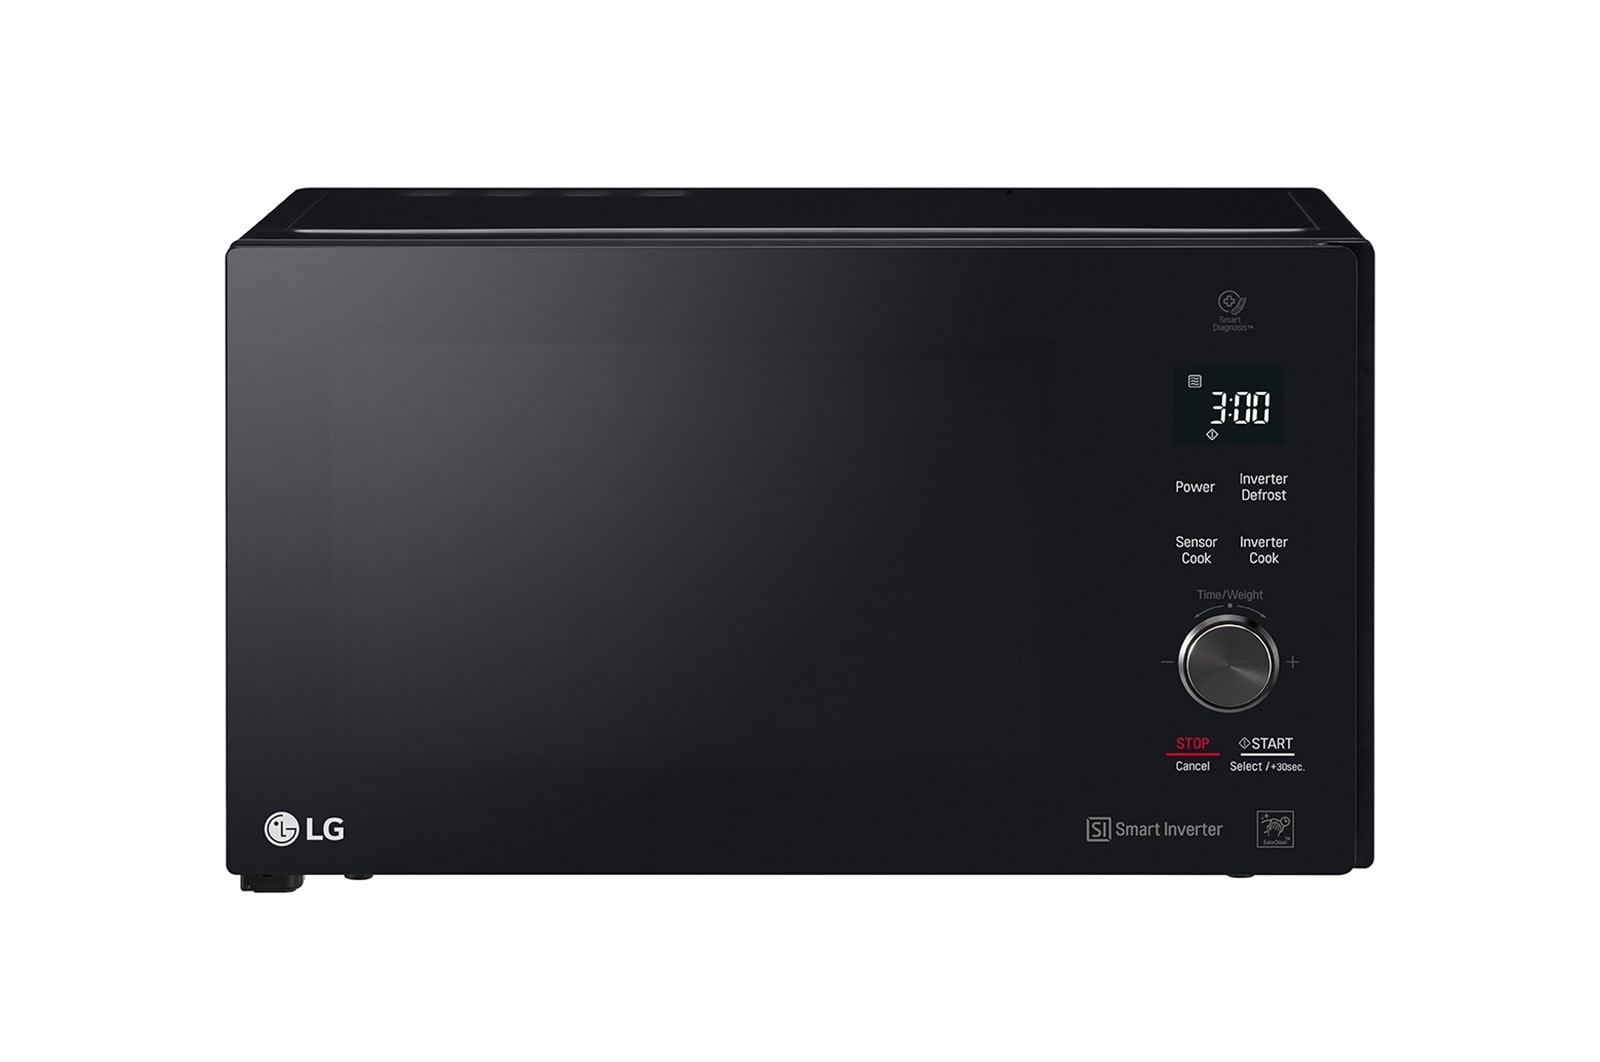 LG MH8265DIS Microwave oven 42L, Smart Inverter, Even Heating and Easy Clean, Black color